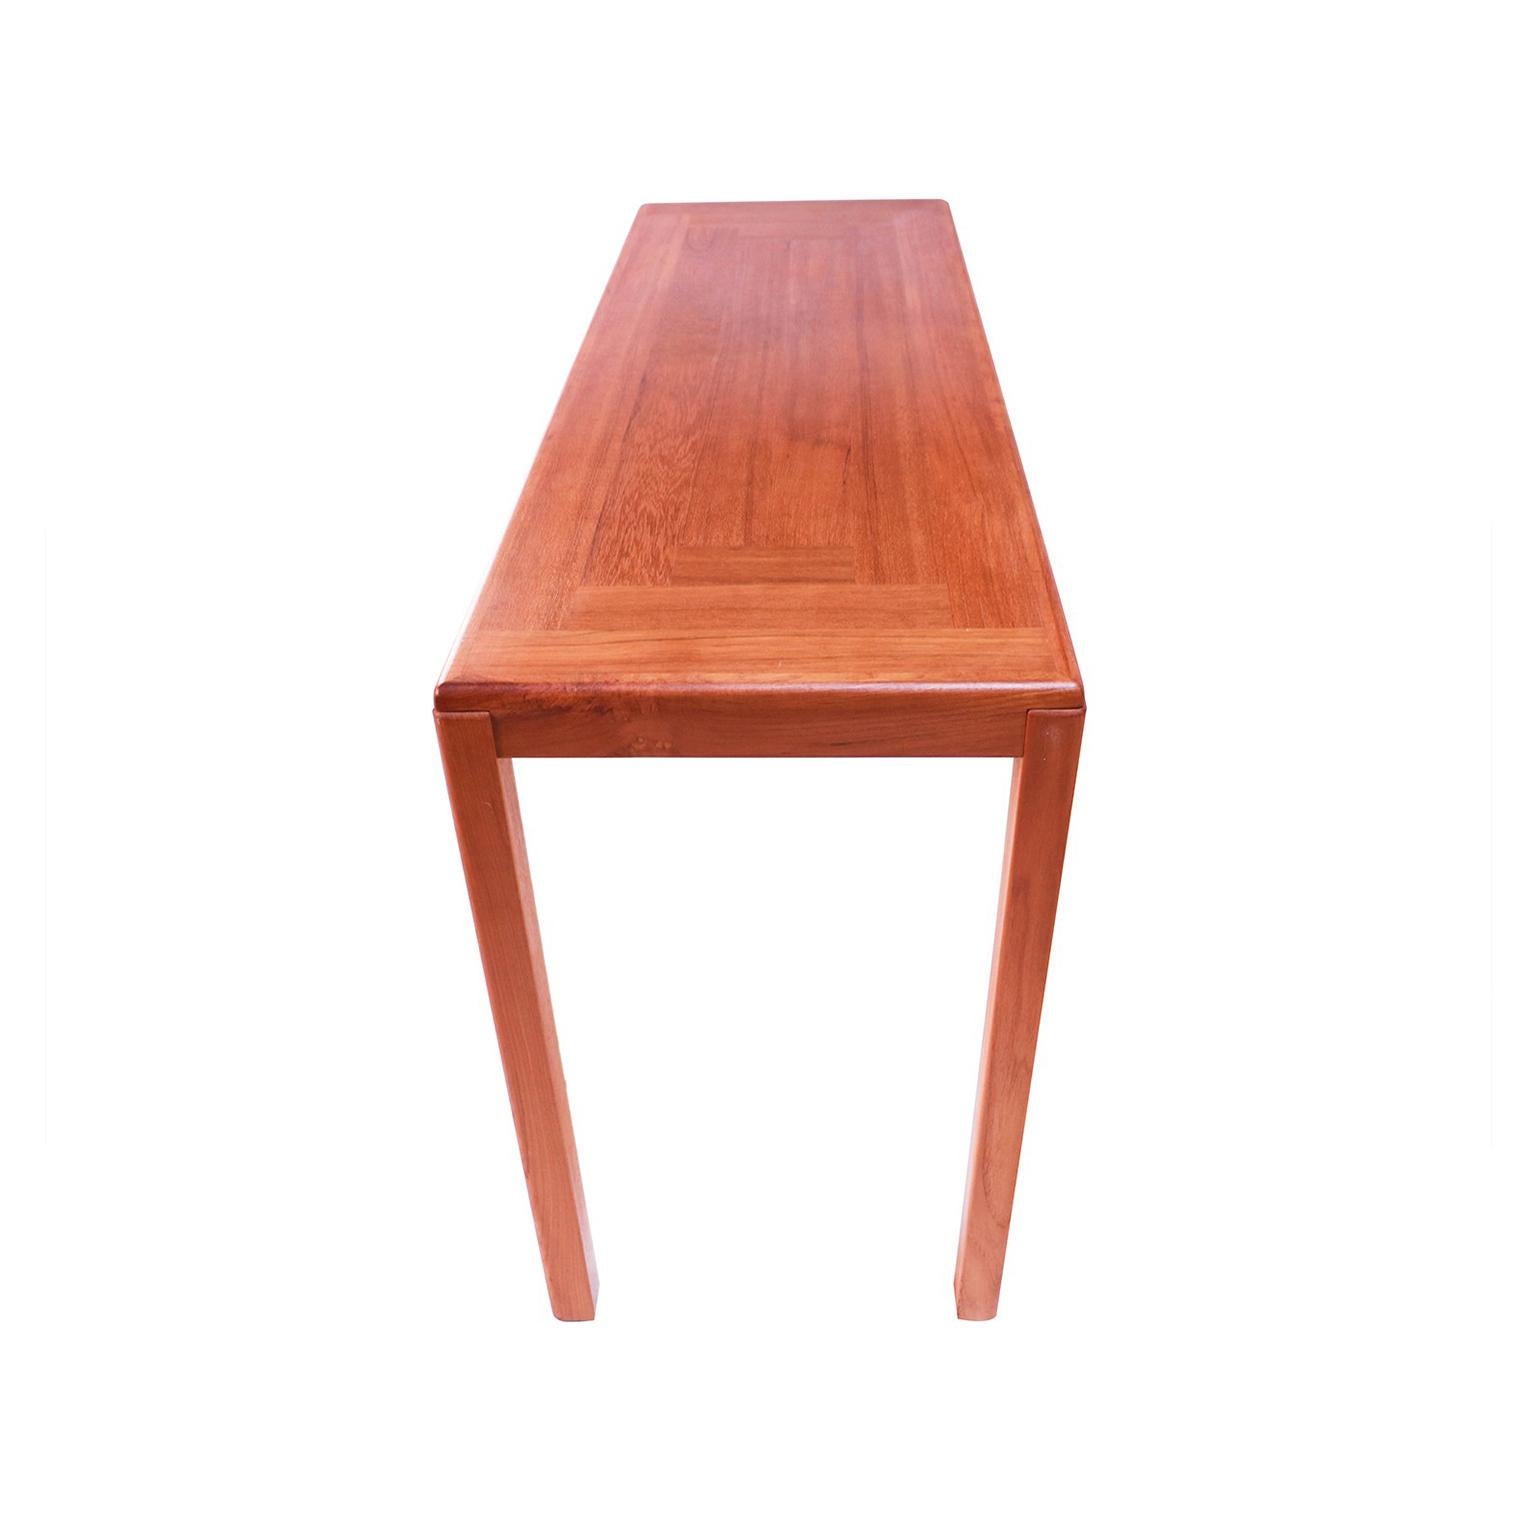 A handsome, sleek Danish modern teak console, sofa table, by Vejle Stole Møbelfabrik. Features a geometric parquet design on the rectangular table top showcasing the teak grain. Finely constructed with rounded edges, the legs slightly protrude from